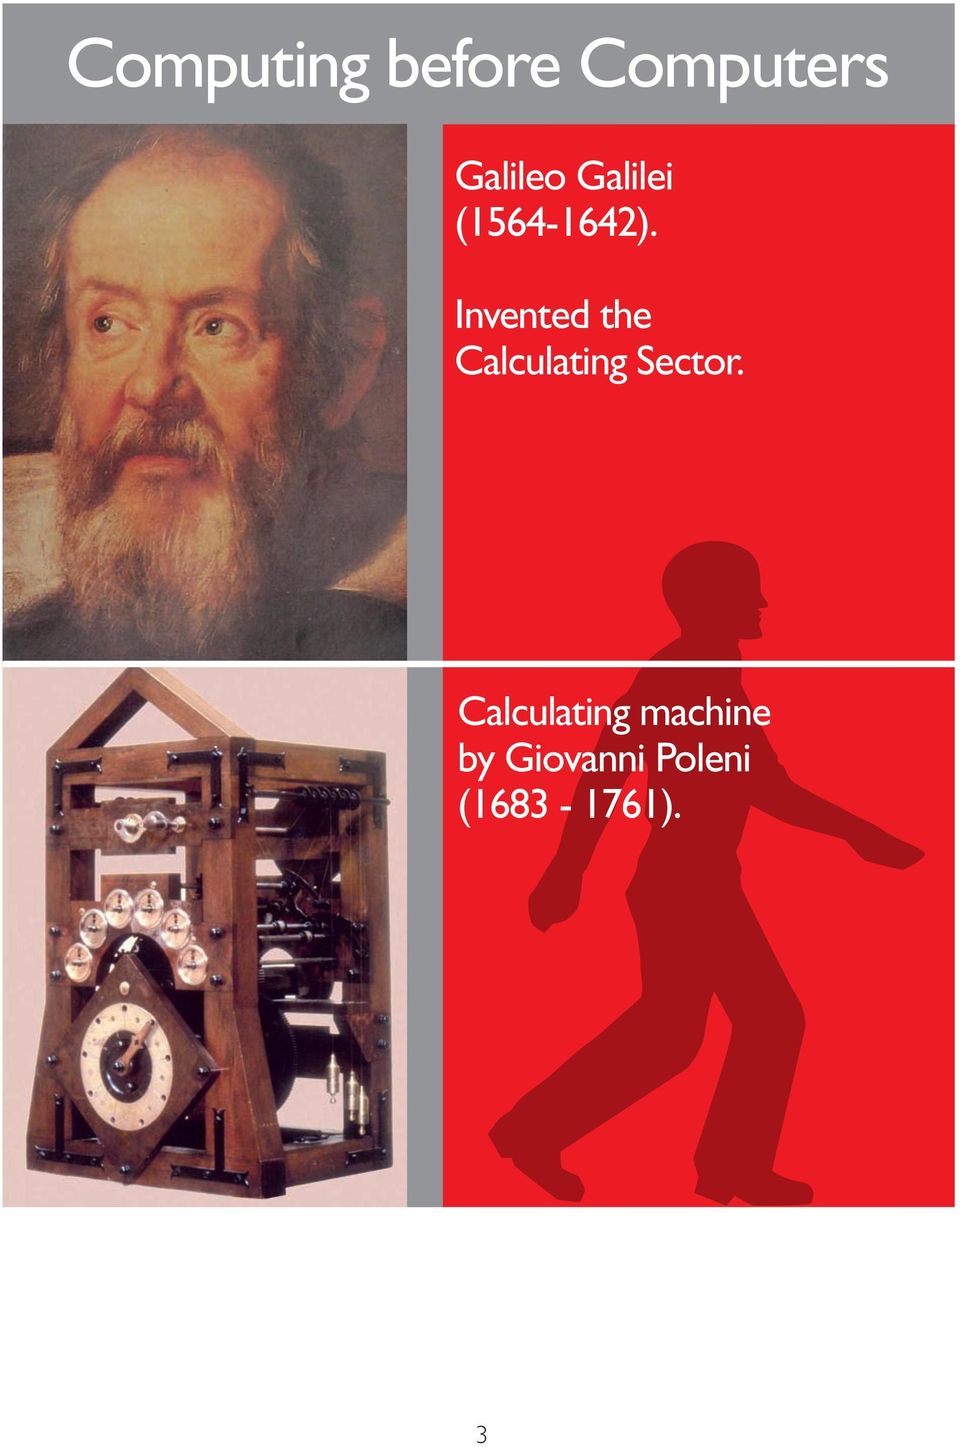 Invented the Calculating Sector.